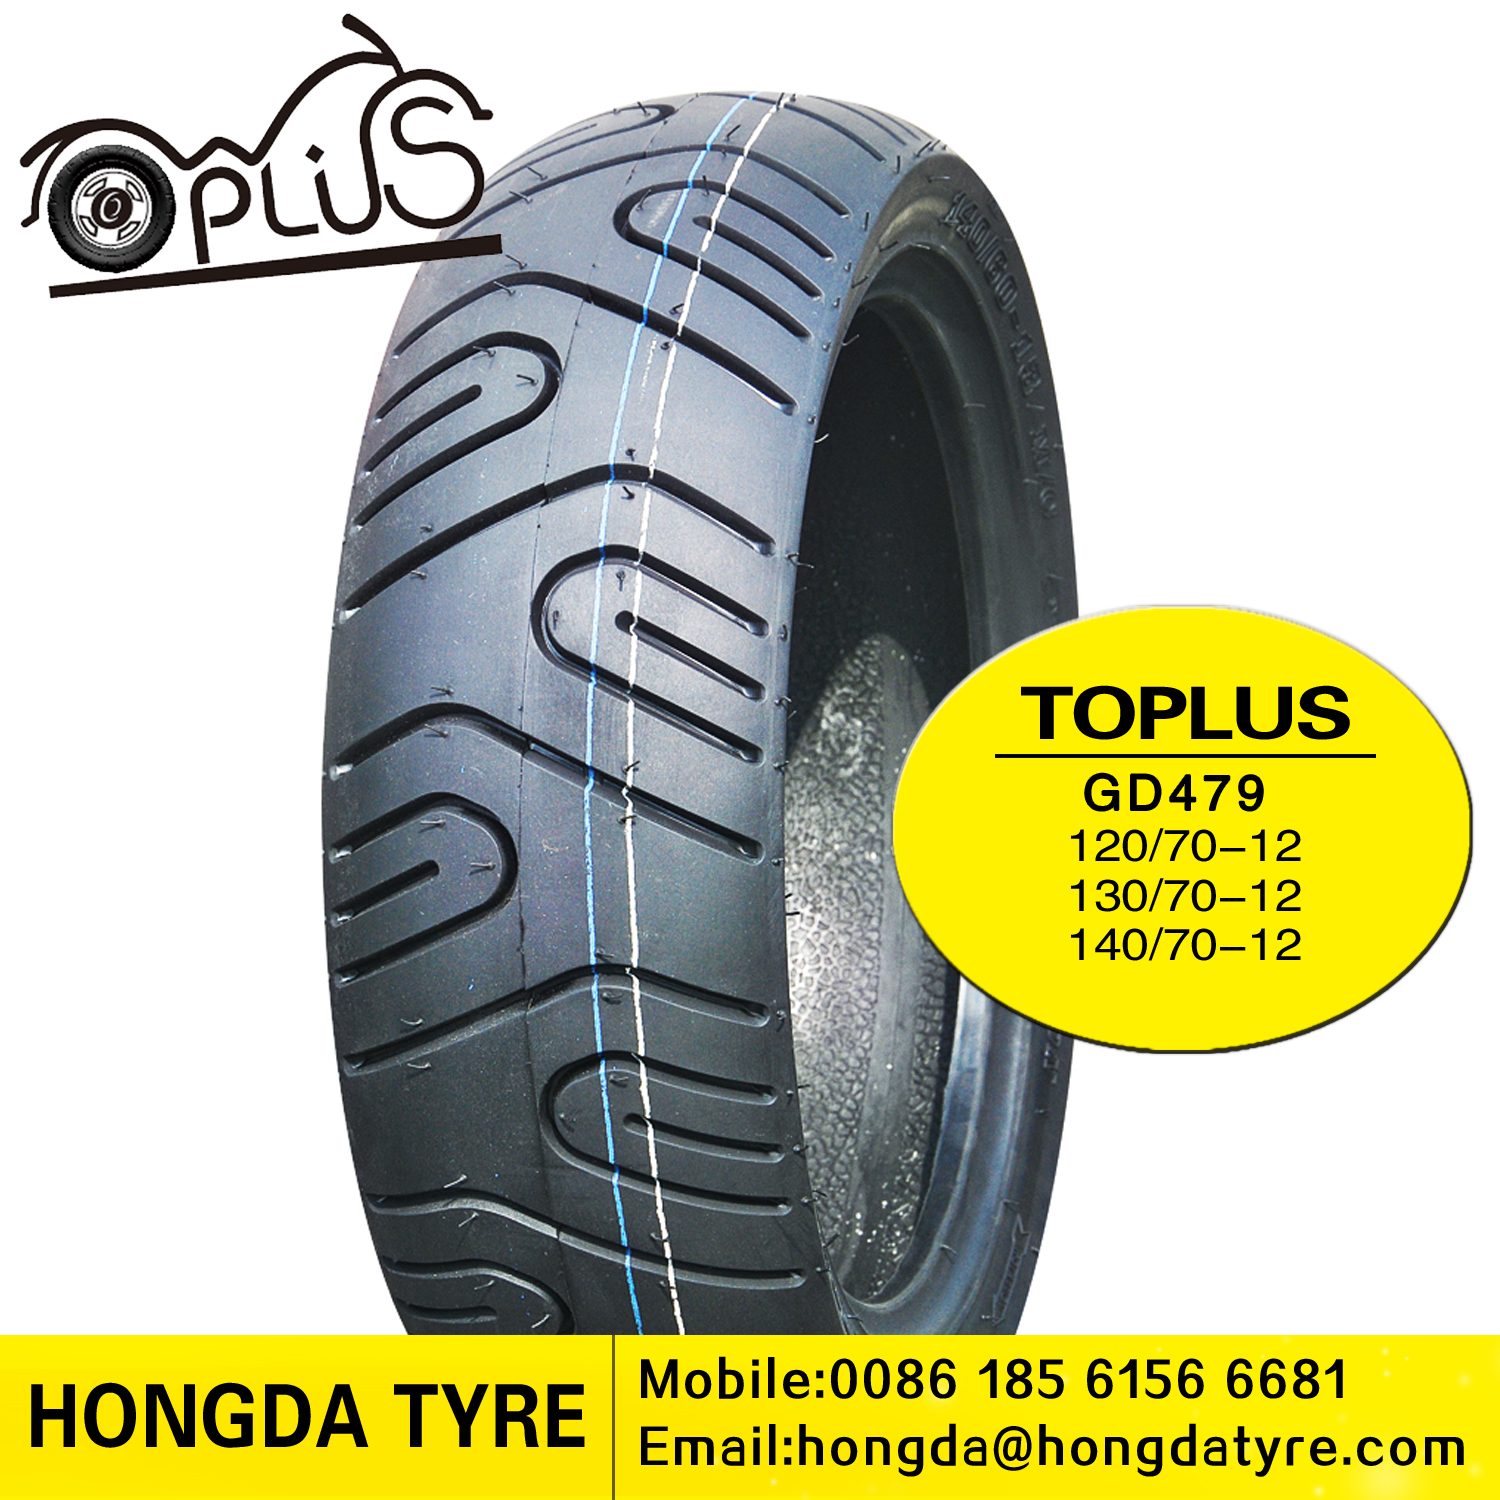 Motorcycle tyre GD479